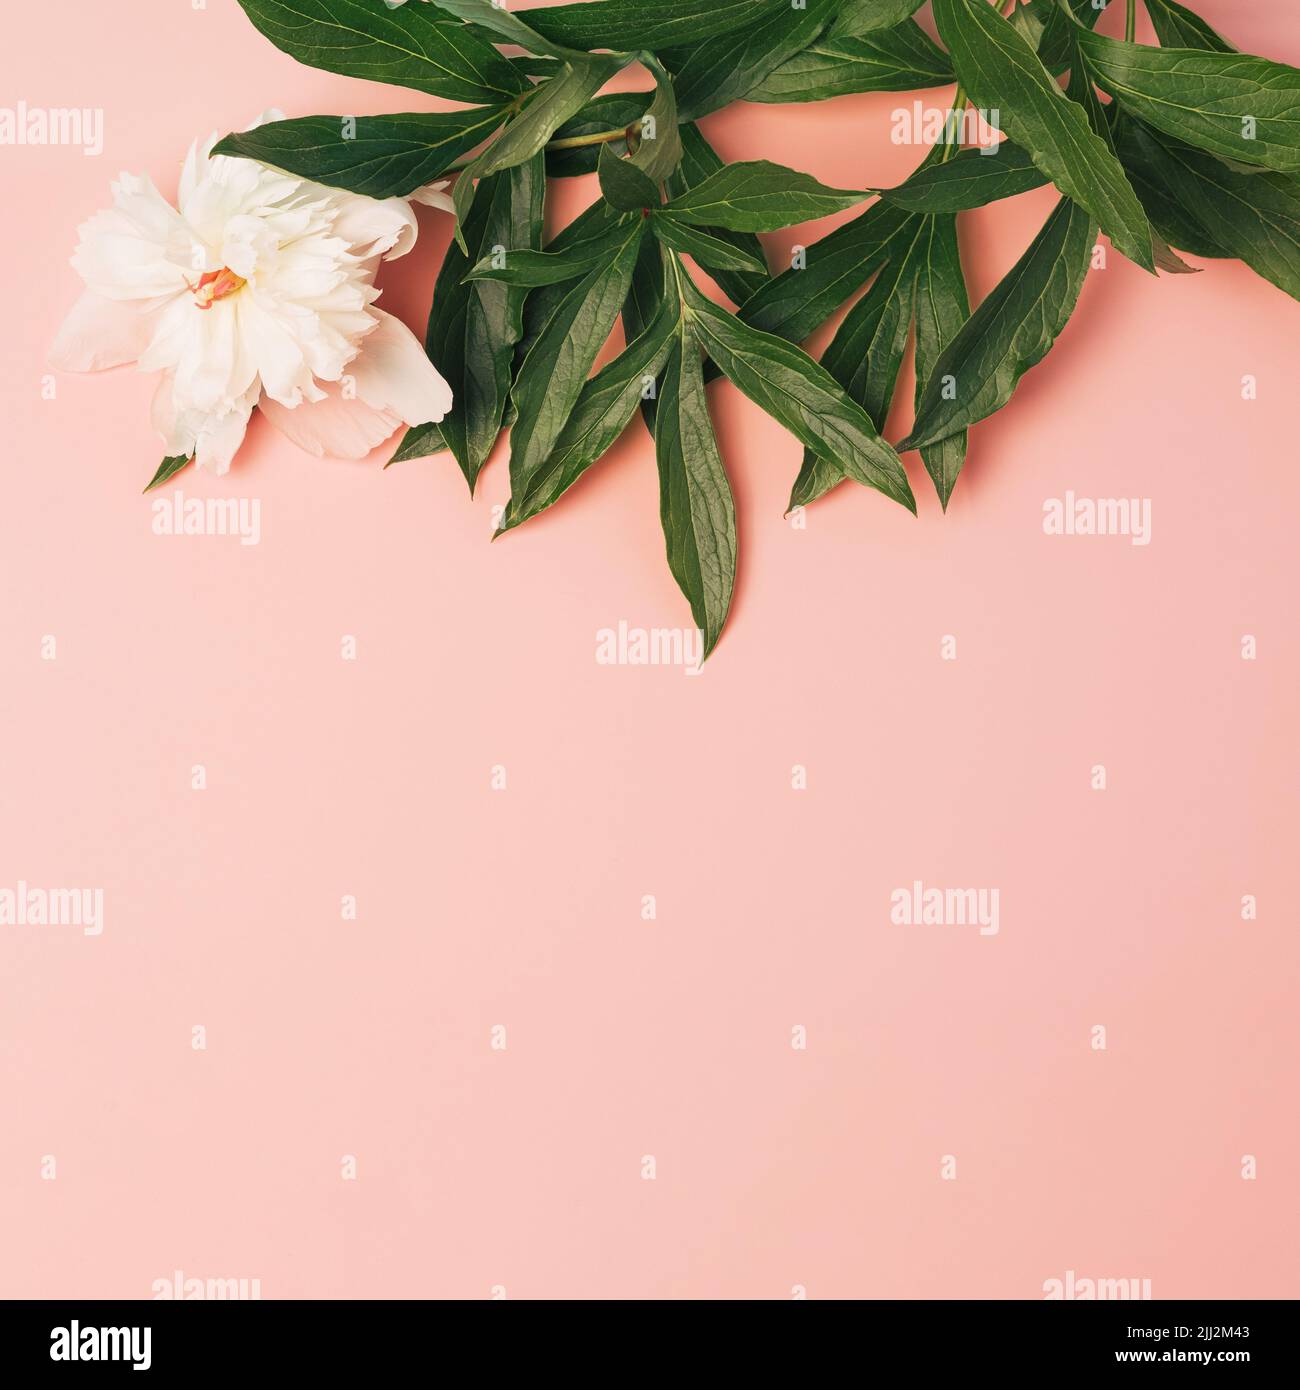 Peony plant with white flowers against the light pink background. Floral minimal top view Stock Photo